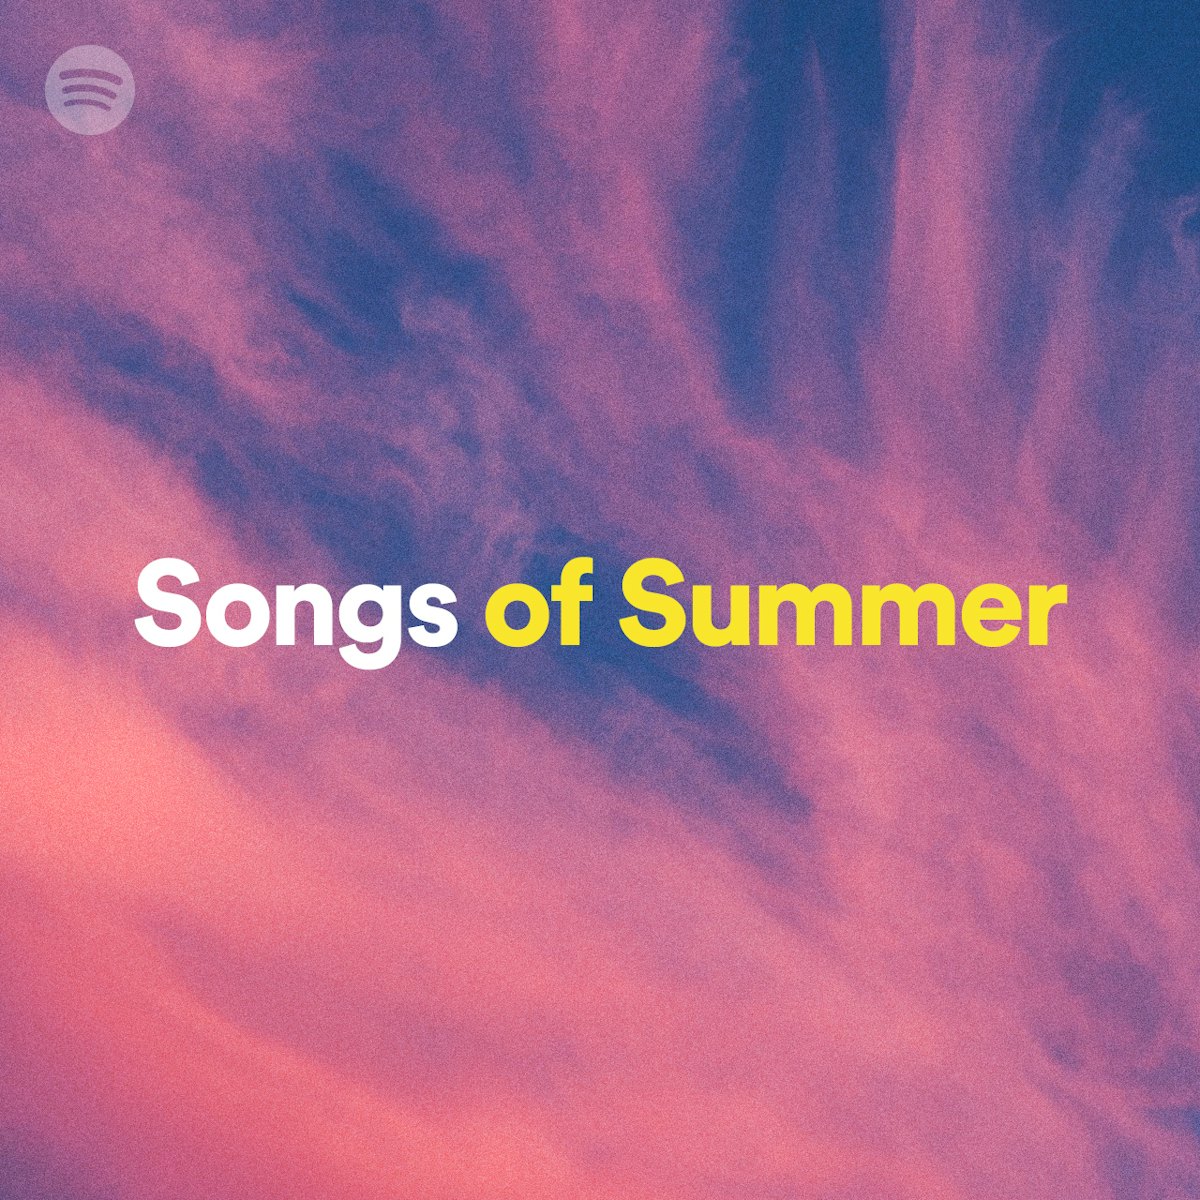 Download Spotify S 2020 Songs Of Summer Playlist Reflects Today S Cultural Climate